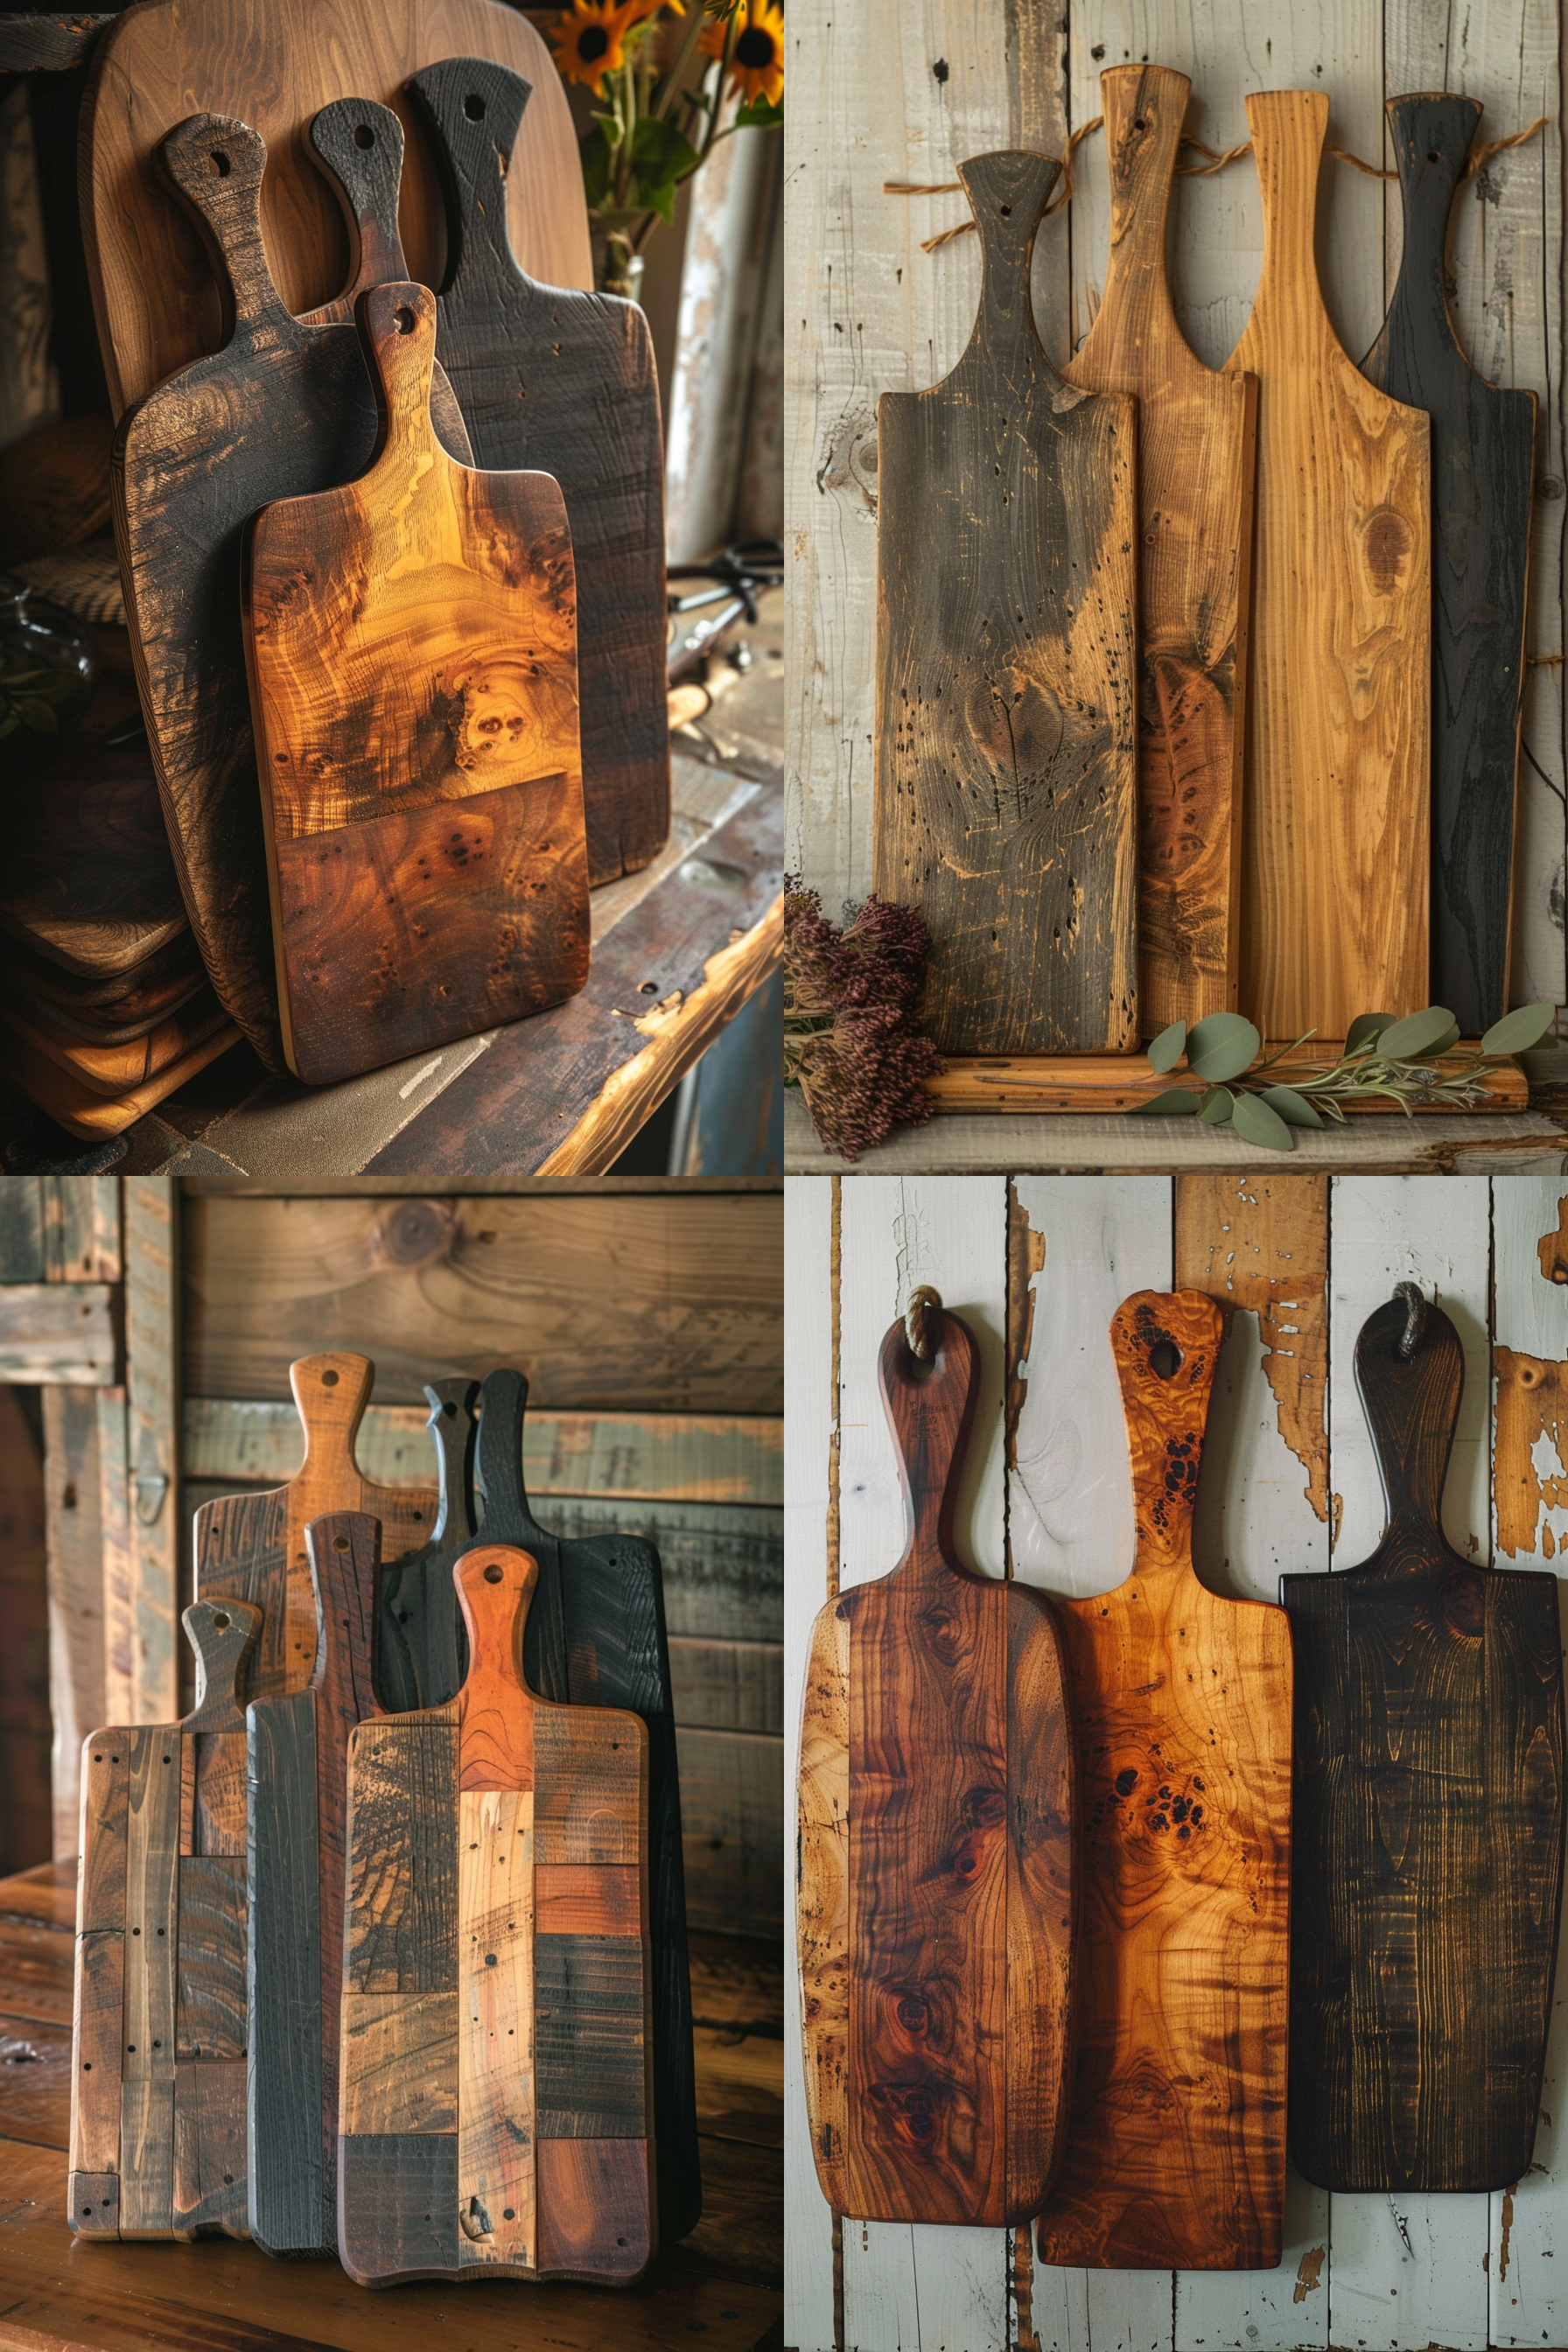 A collage of various rustic wooden cutting boards in different shapes and colors, displayed in a cozy kitchen setting.